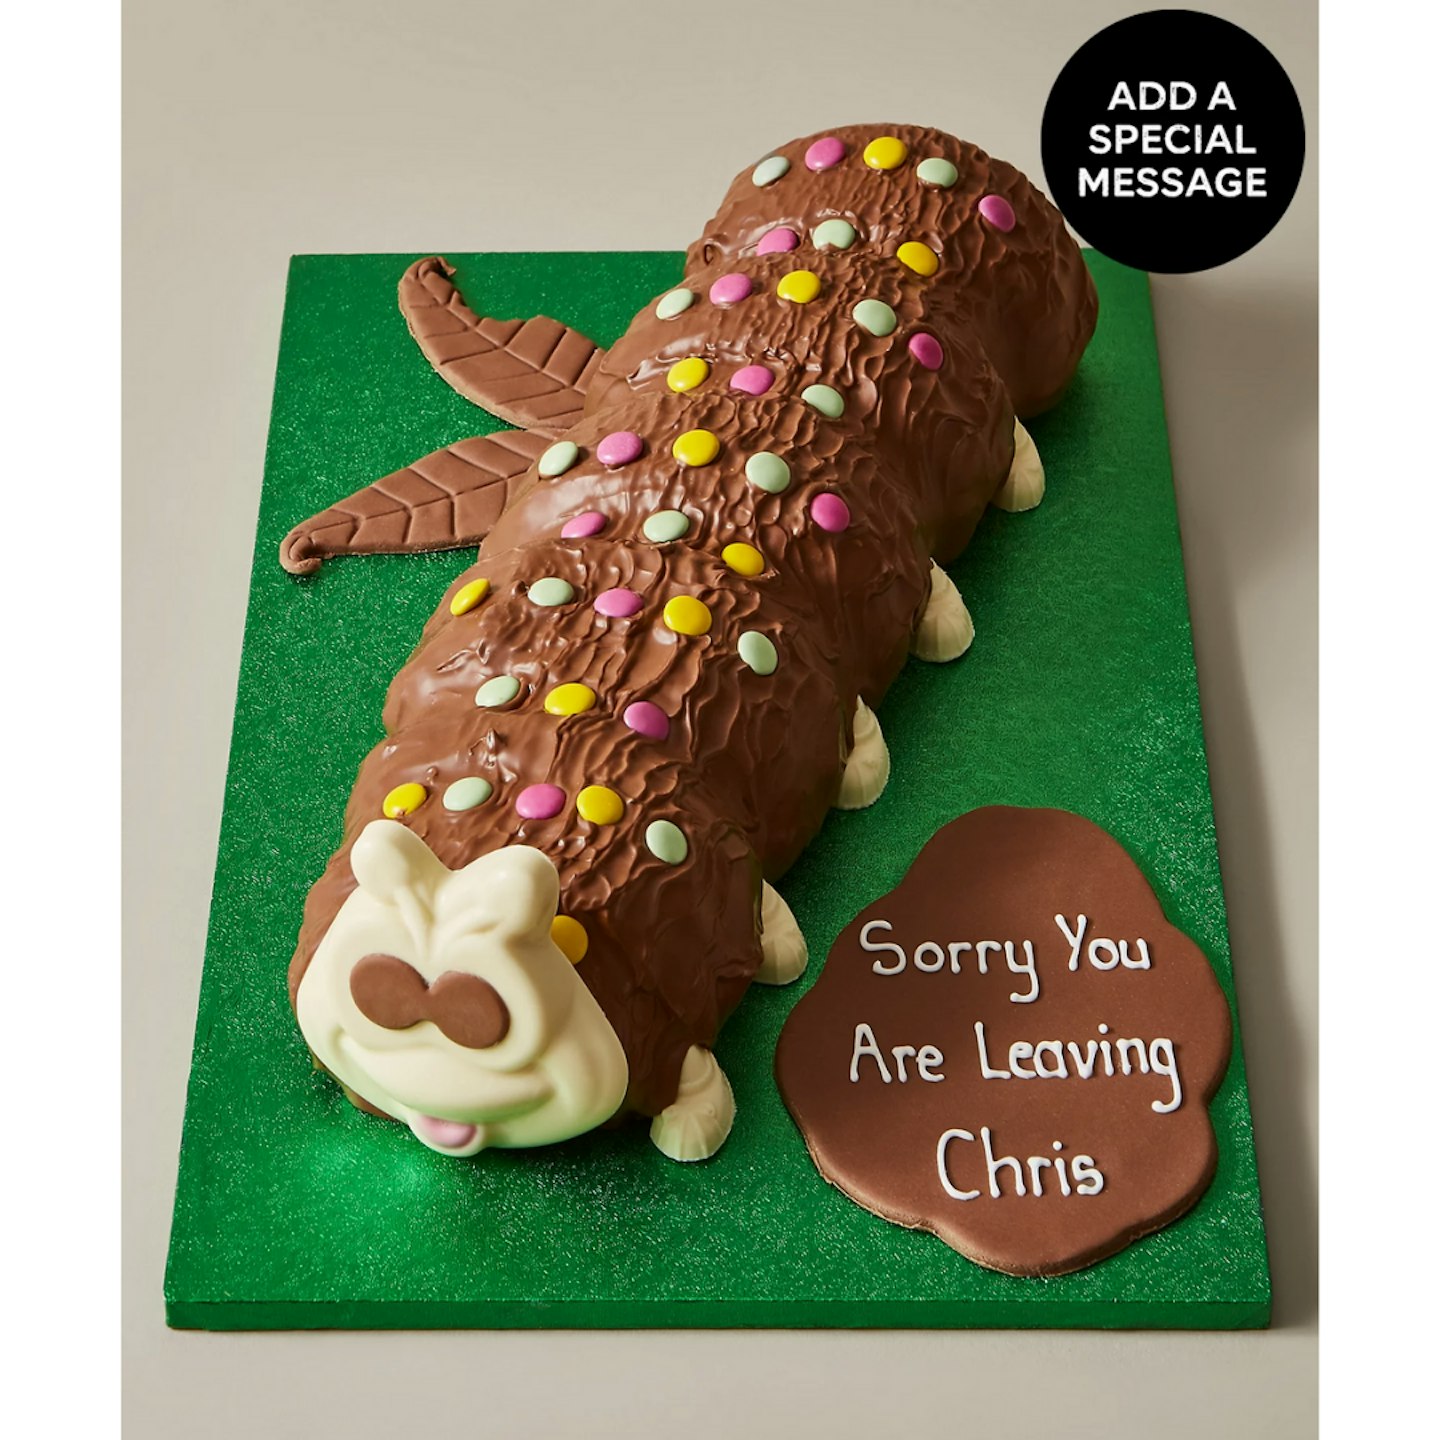 The best supermarket birthday cakes: Giant Colin the Caterpillar Cake